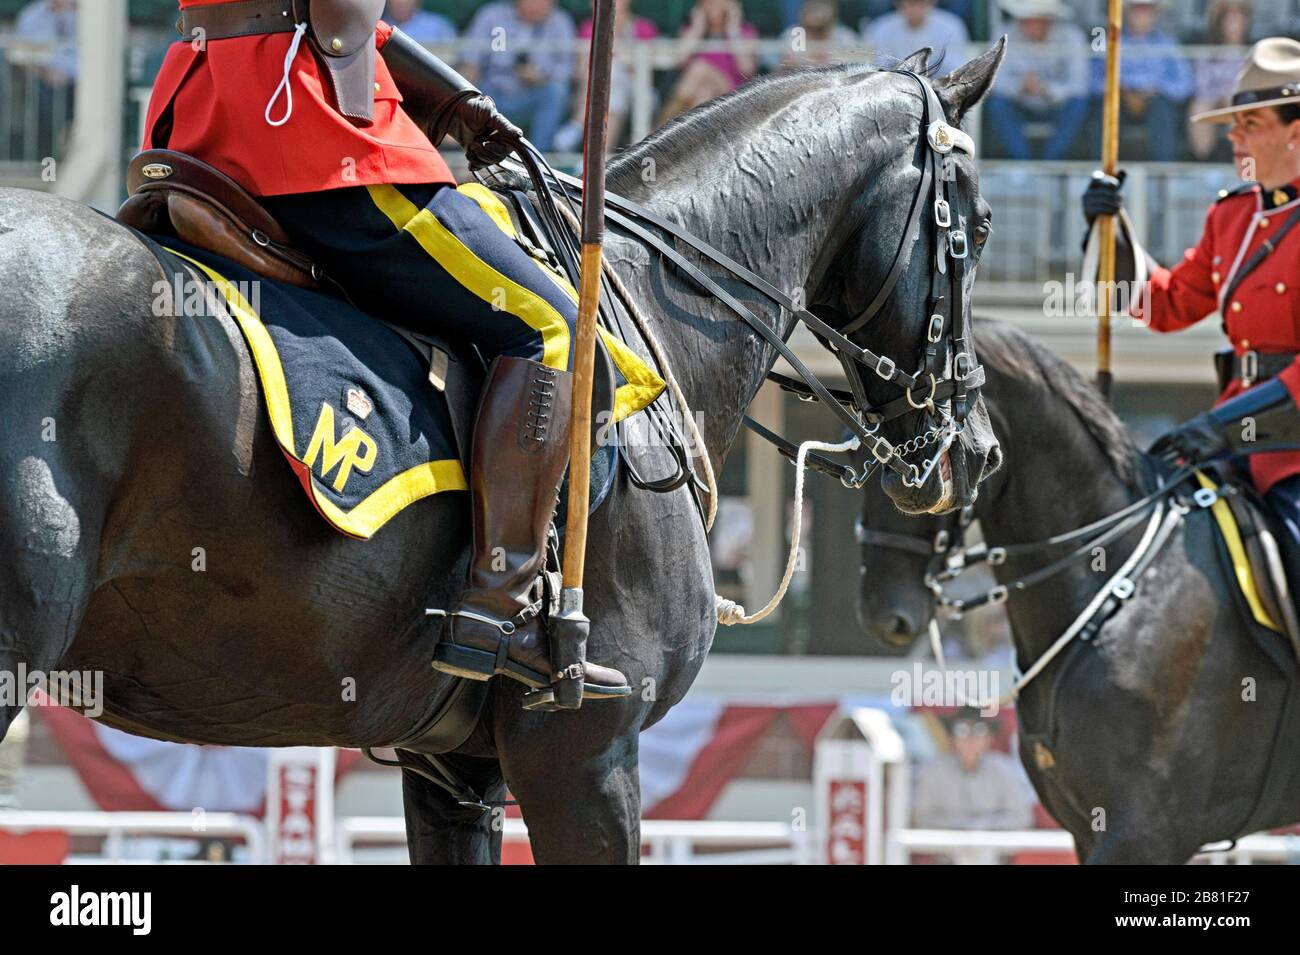 Royal Canadian Mounted Police (RCMP) Musical  Ride at the Calgary Stampede, Alberta Canada Stock Photo